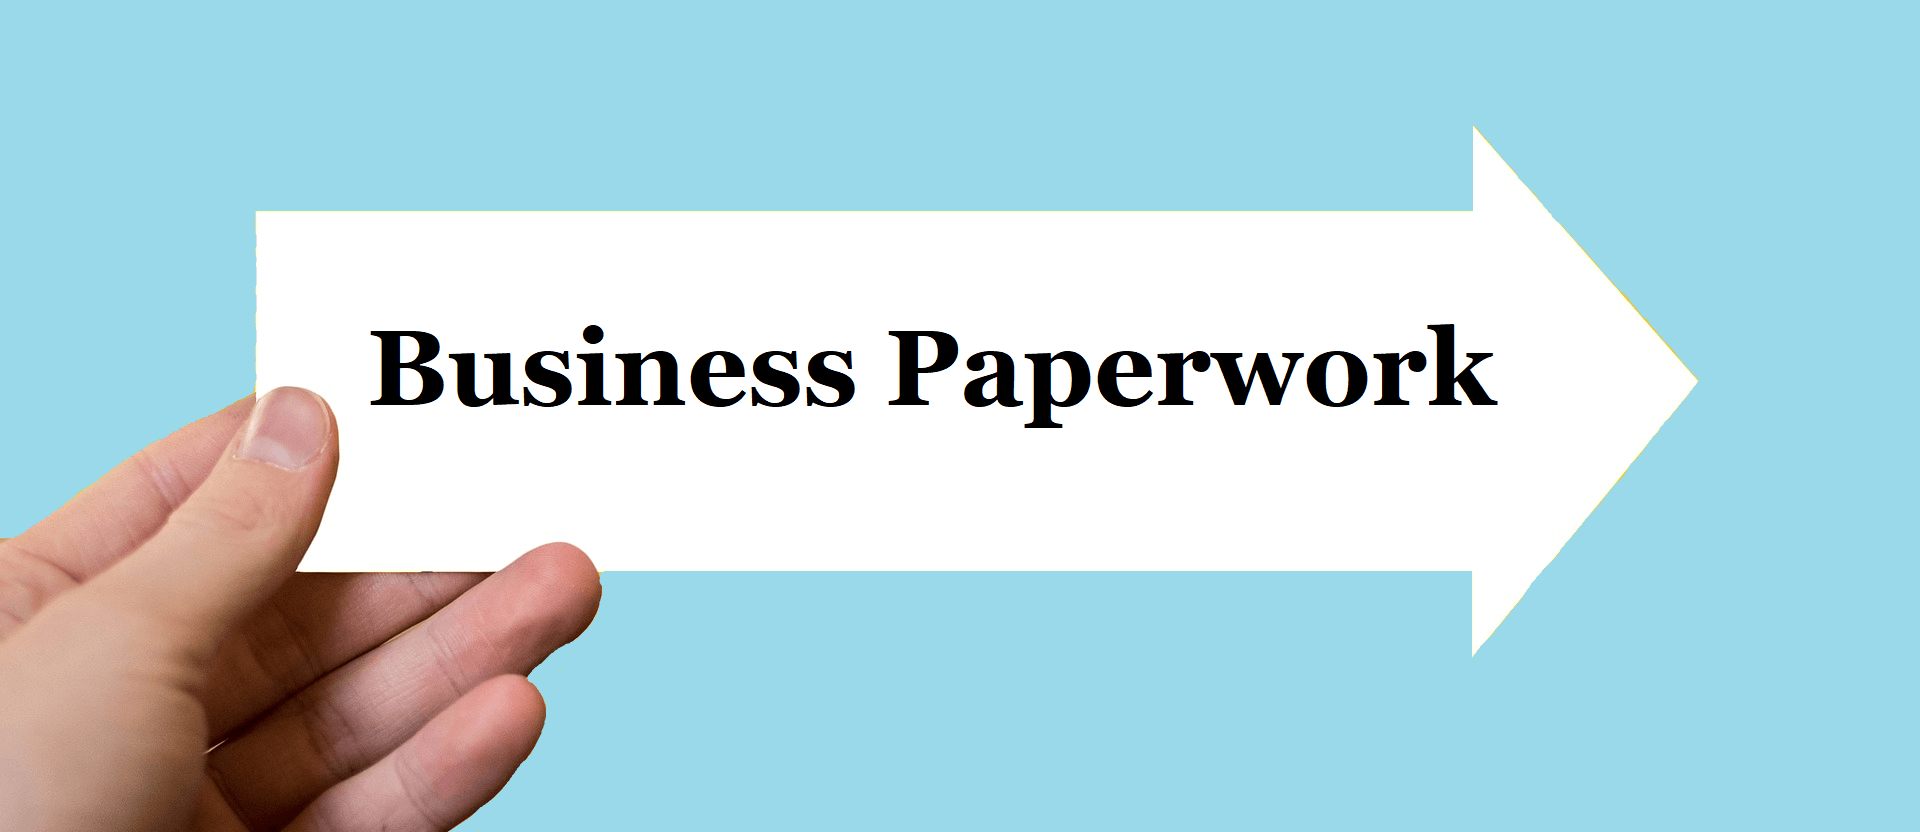 Select a business paperwork for the business setup in dubai